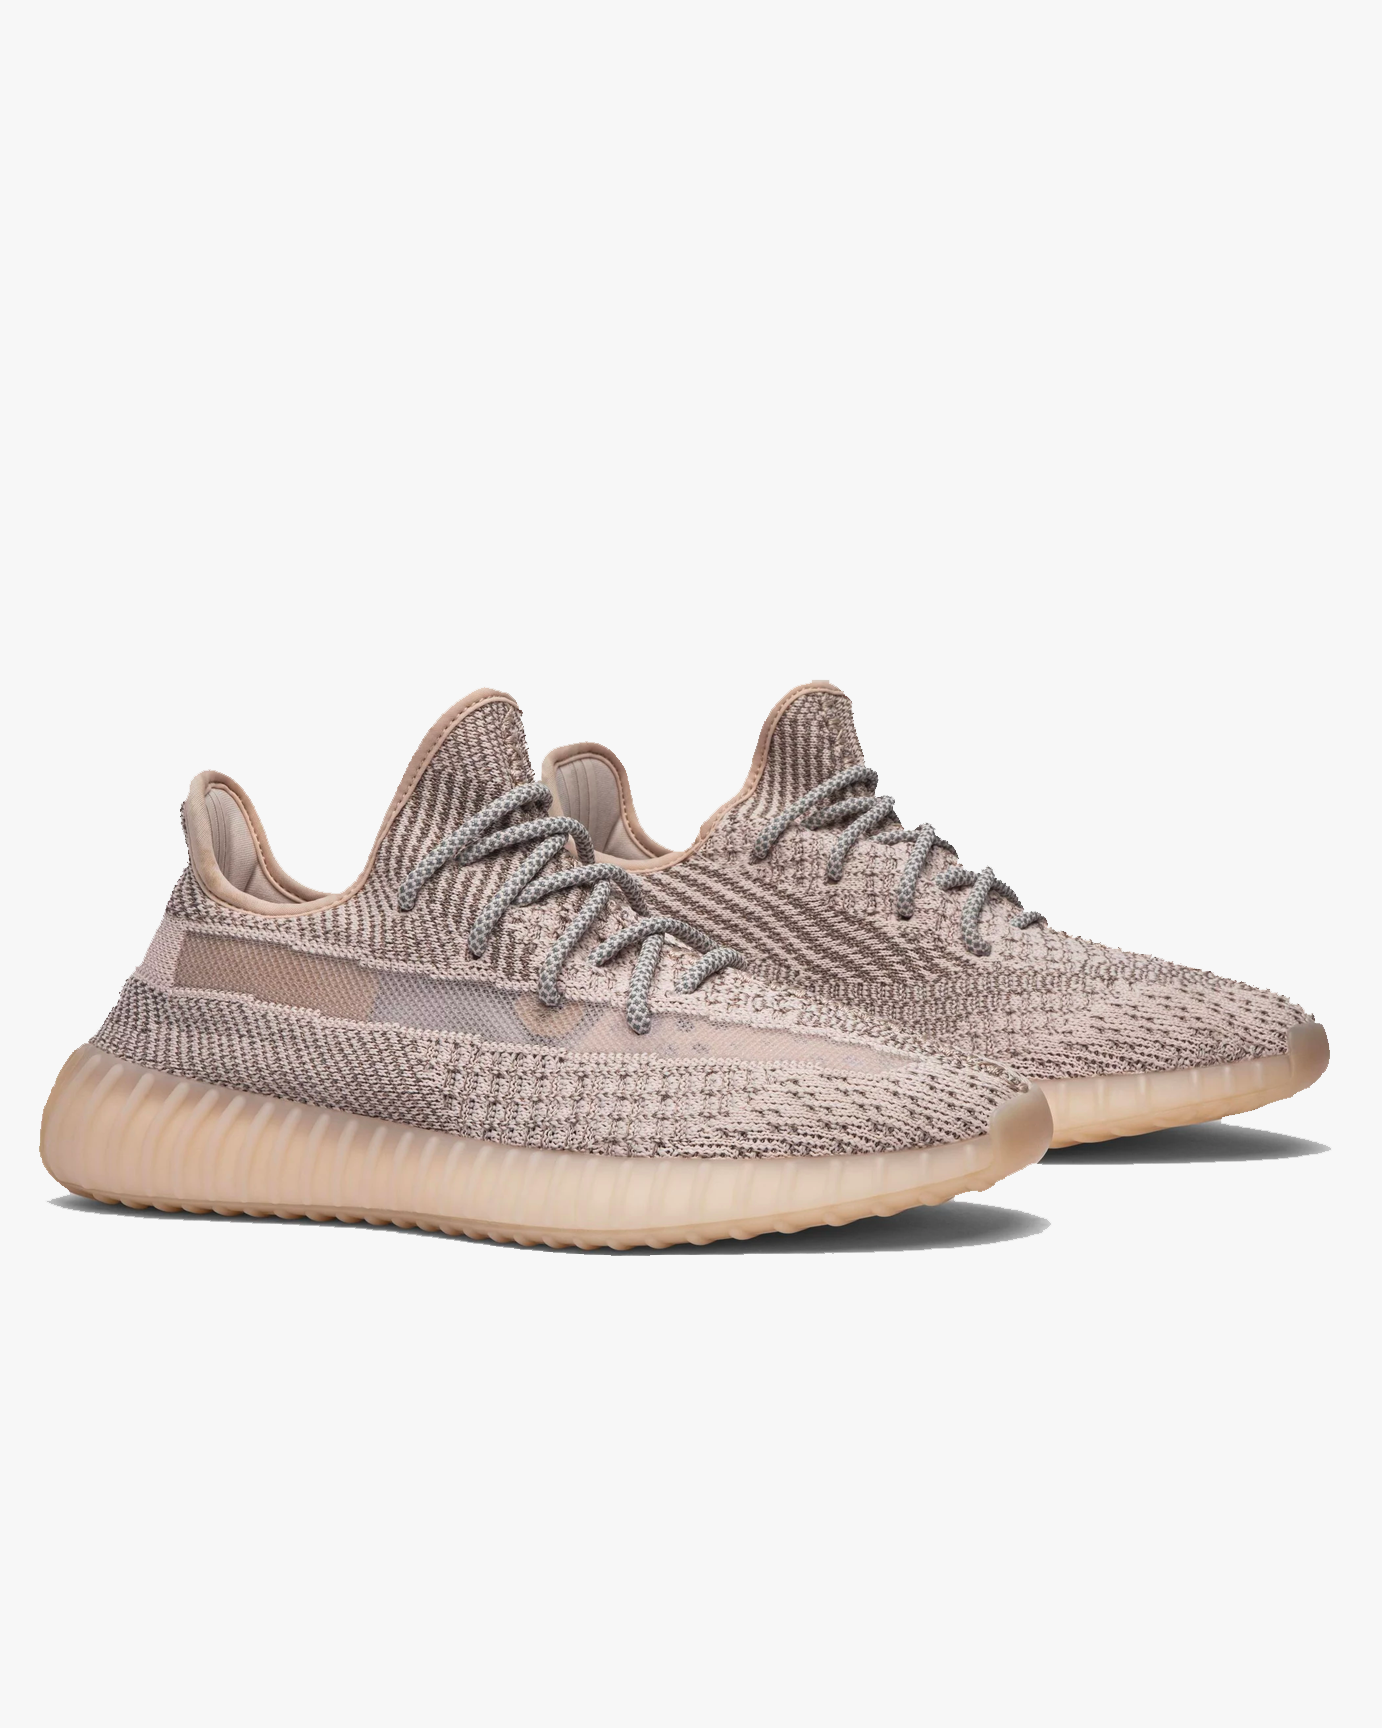 Yeezy Boost 350 V2 'Synth Non-Reflective' | RARE LAB